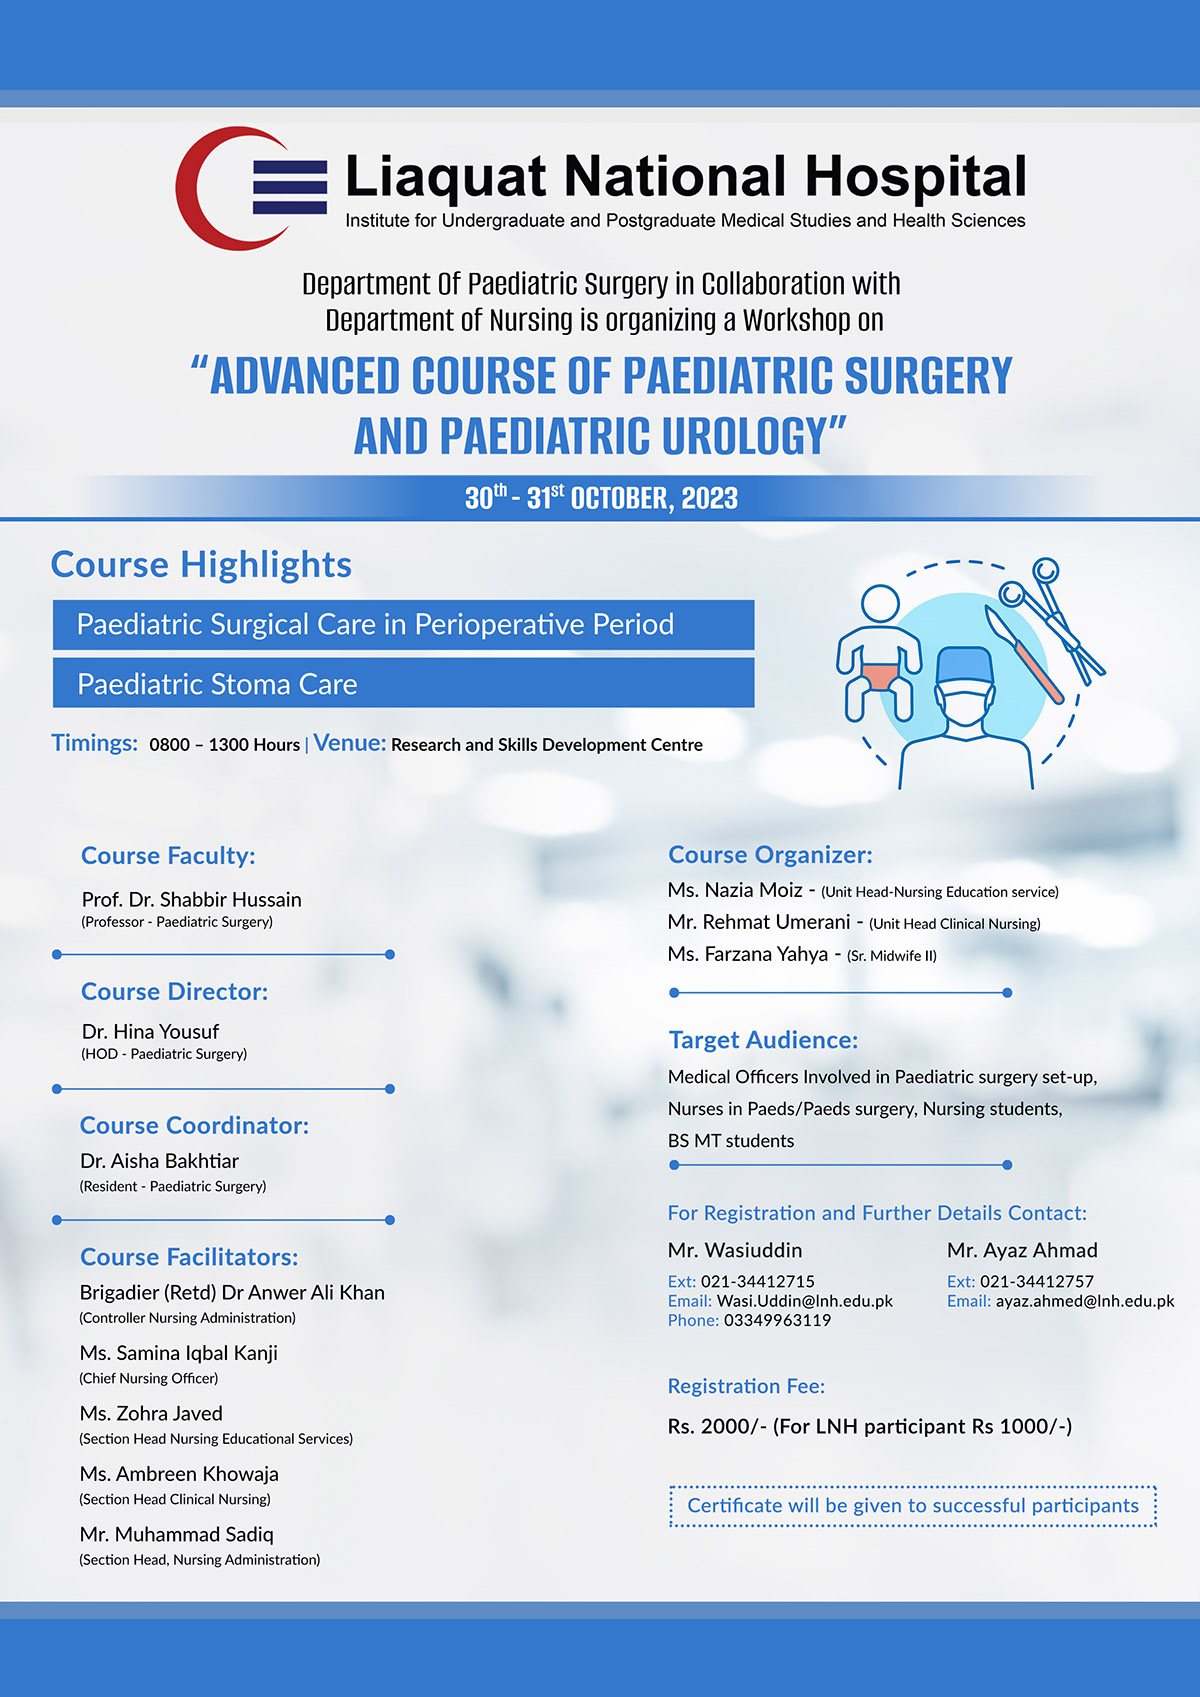 Advanced Course of Paediatric Surgery and Paediatric Urology